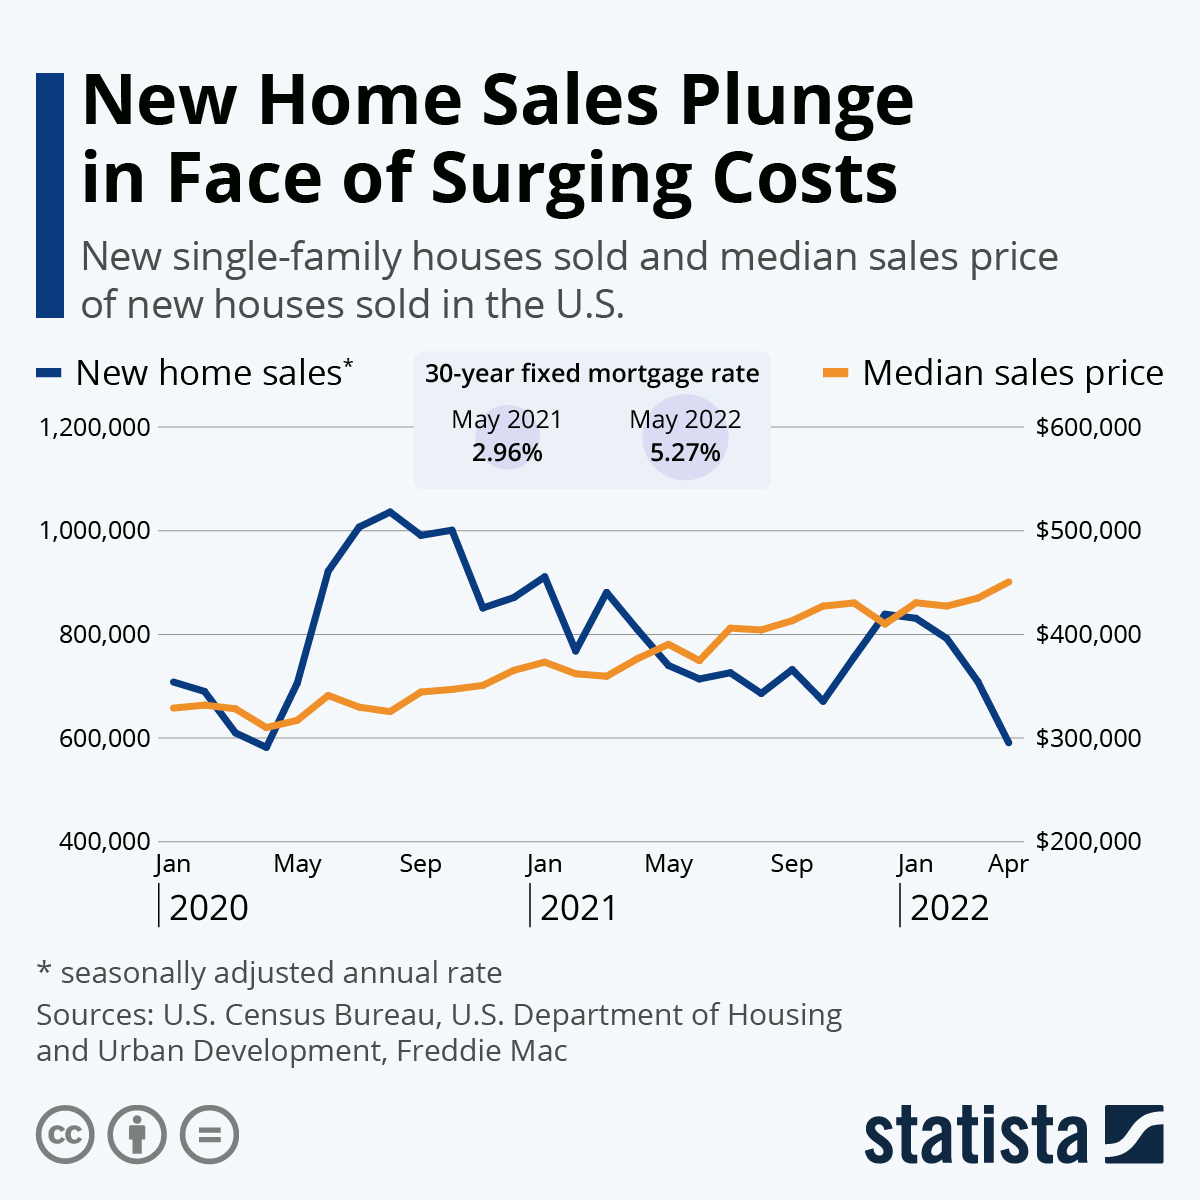 New Home Sales Plunge in Face of Surging Costs